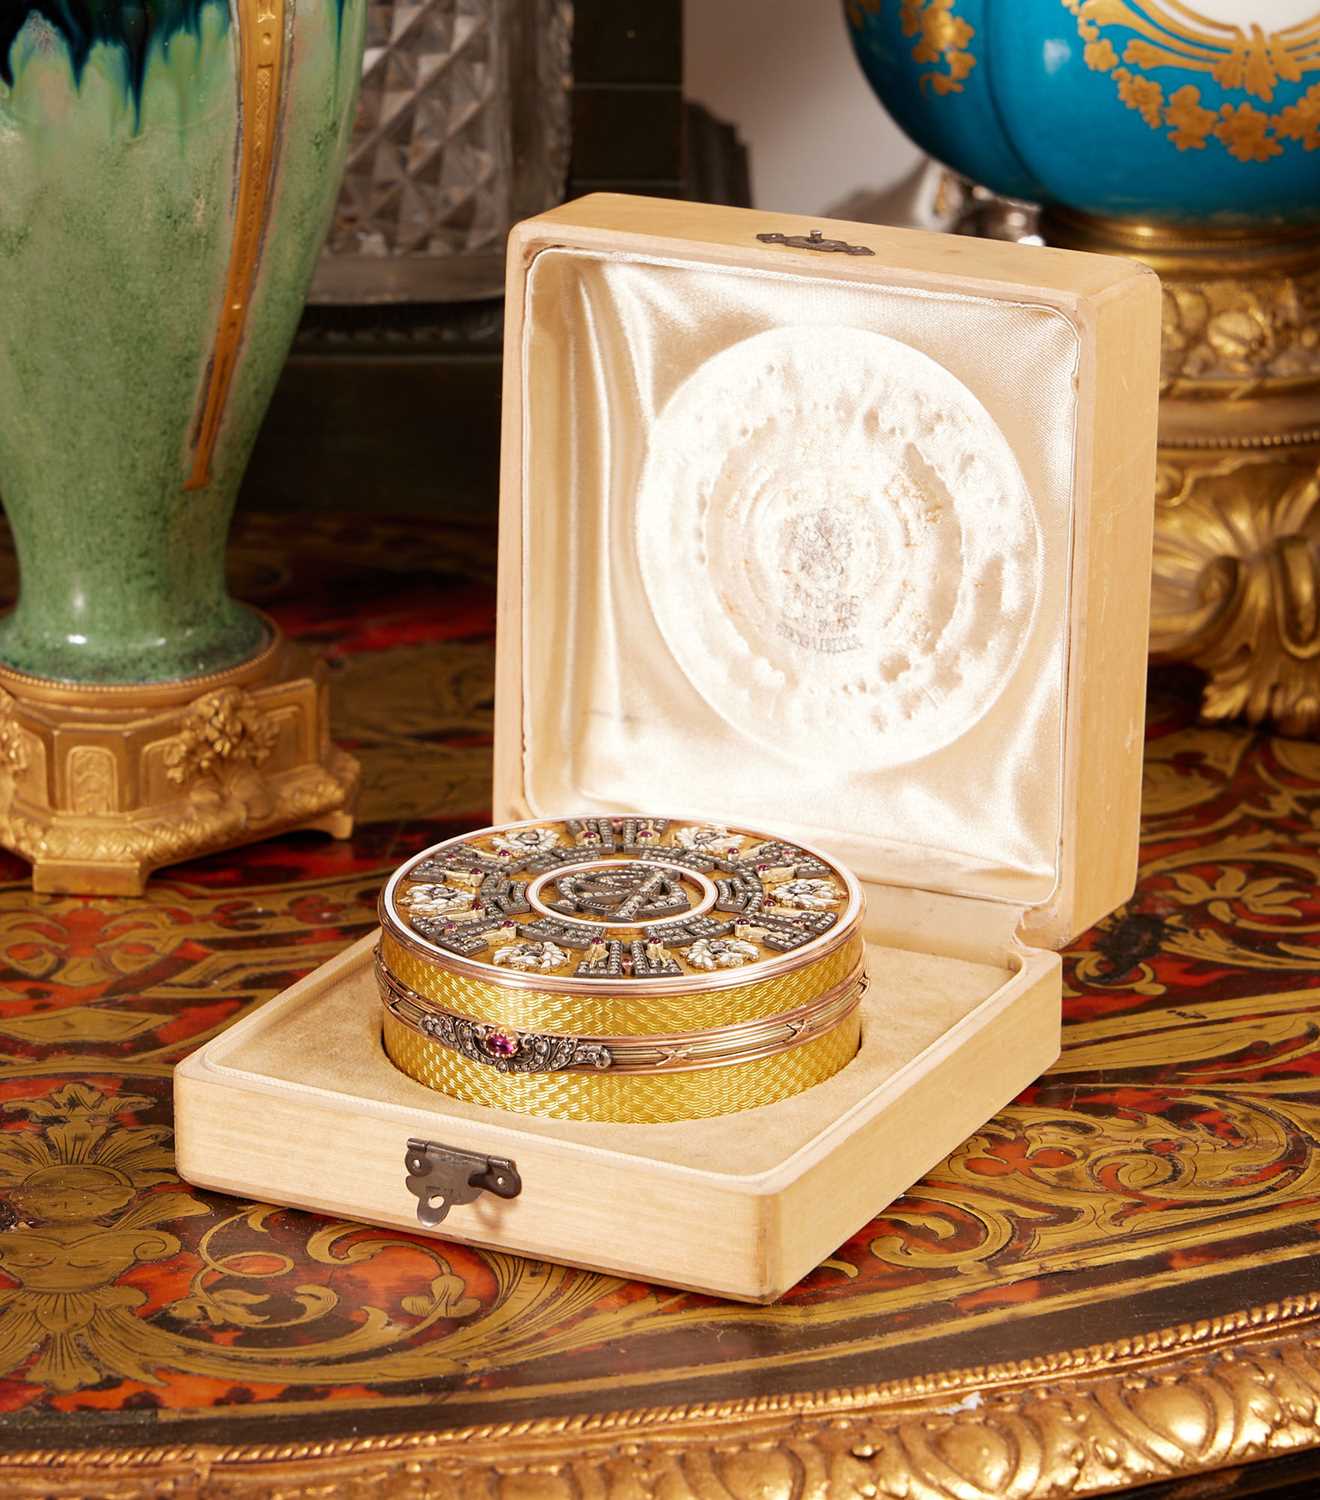 A 14 CARAT GOLD, DIAMOND AND ENAMEL BOX IN THE STYLE OF FABERGE